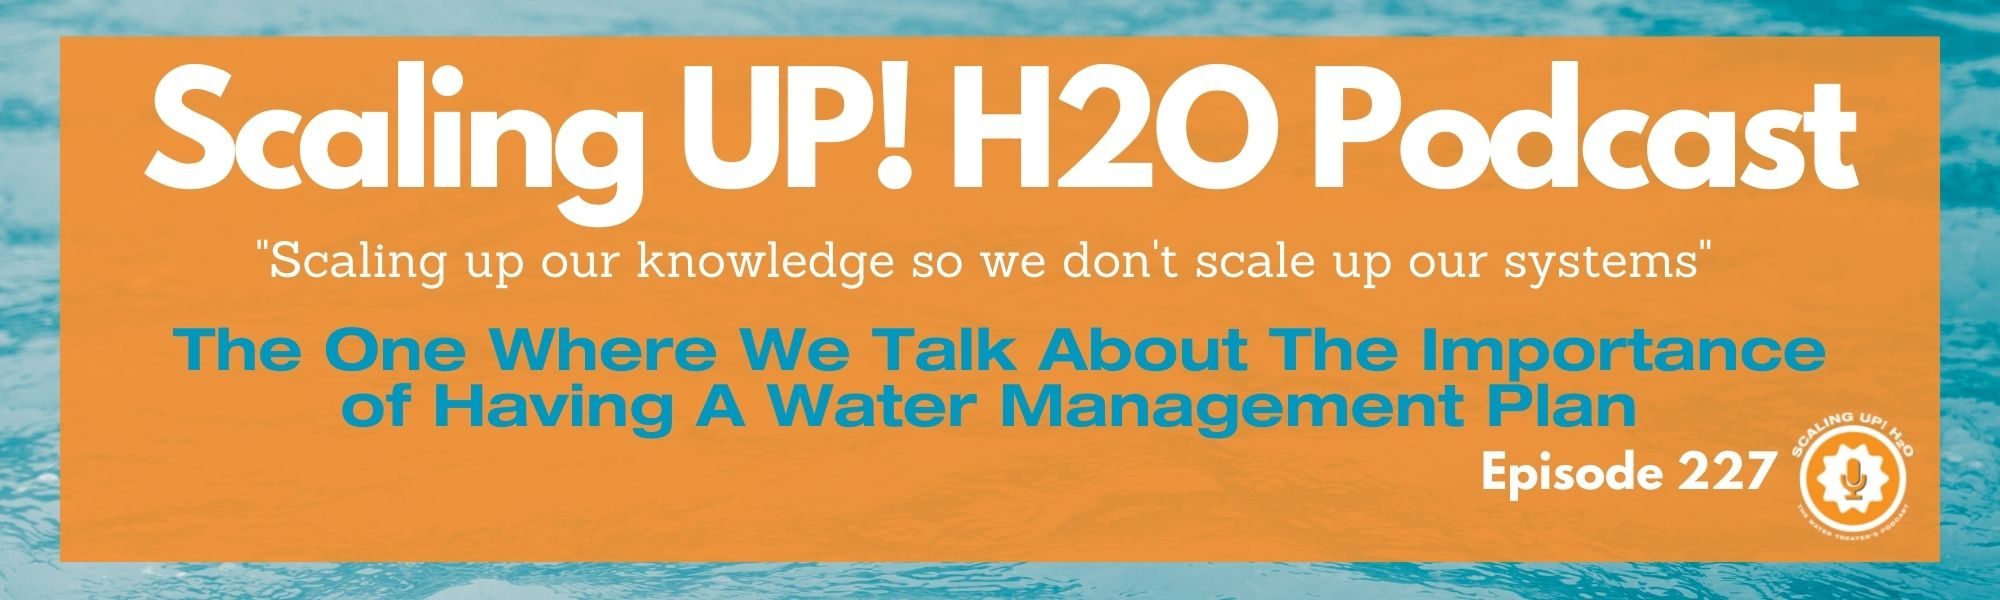 227 The One Where We Talk About The Importance of Having A Water Management Plan - Scaling UP! H2O